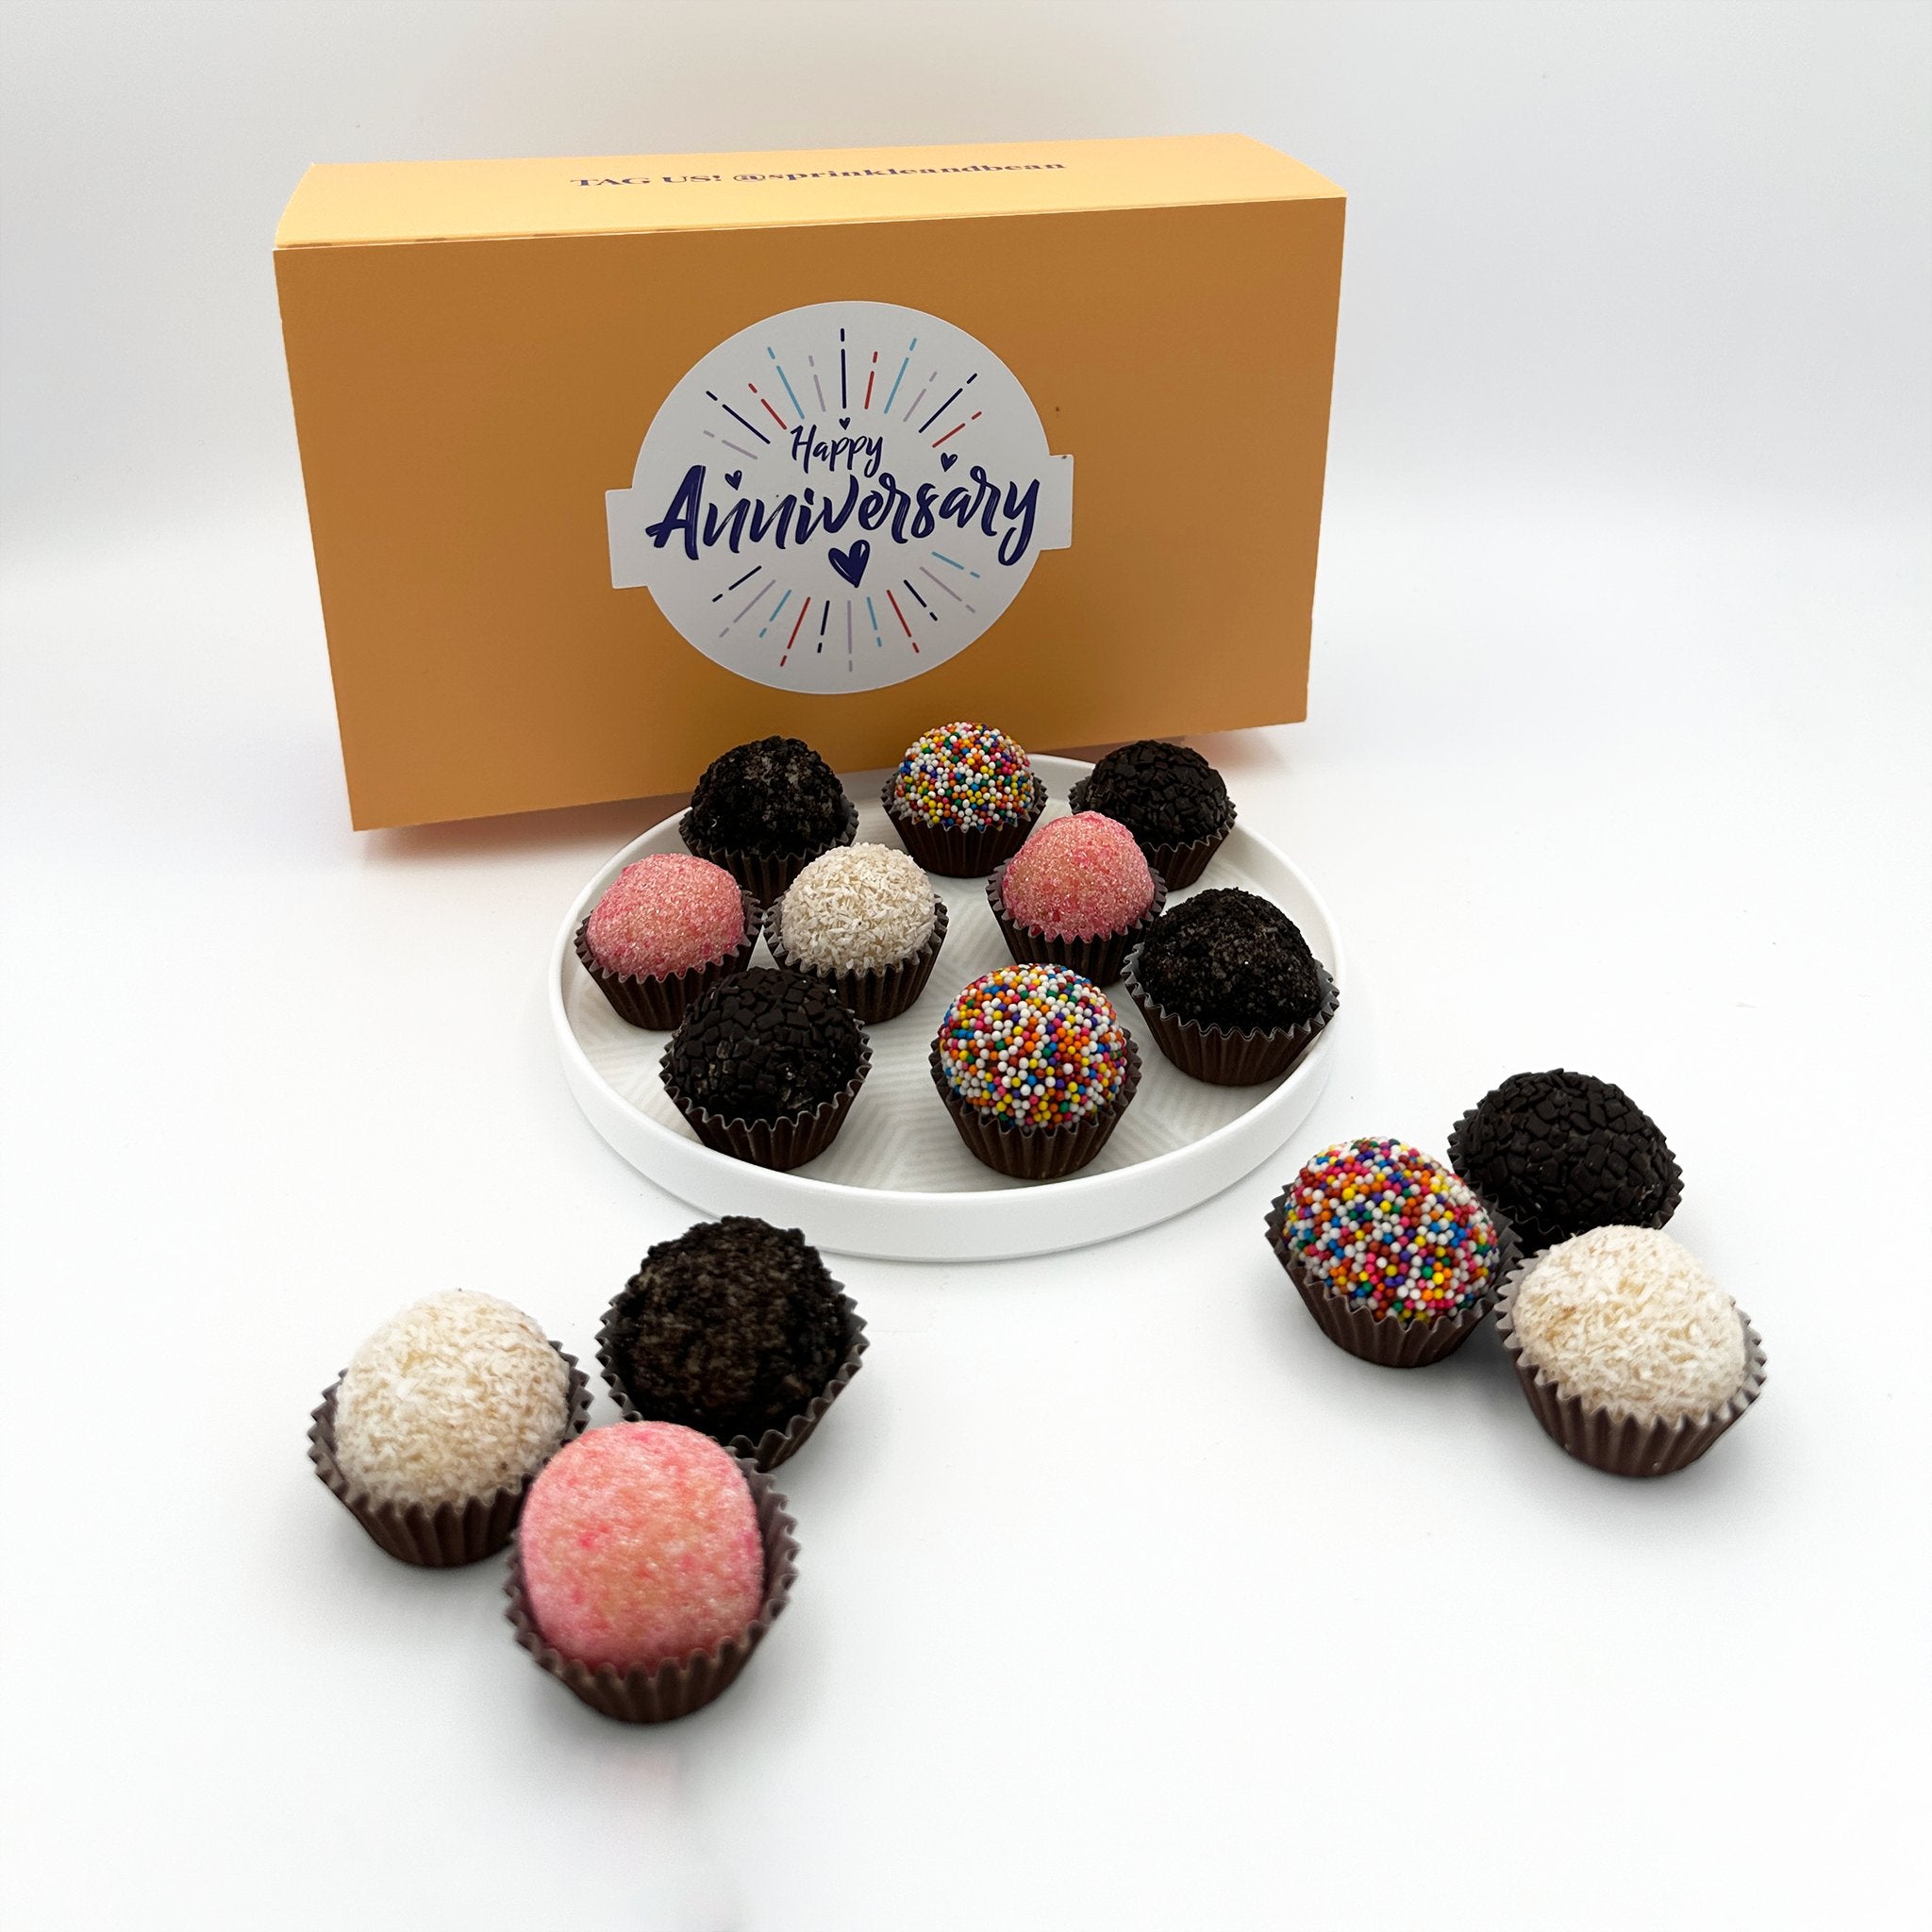 A plate of Anniversary Classic Celebration Brigadeiros with colorful sprinkles.